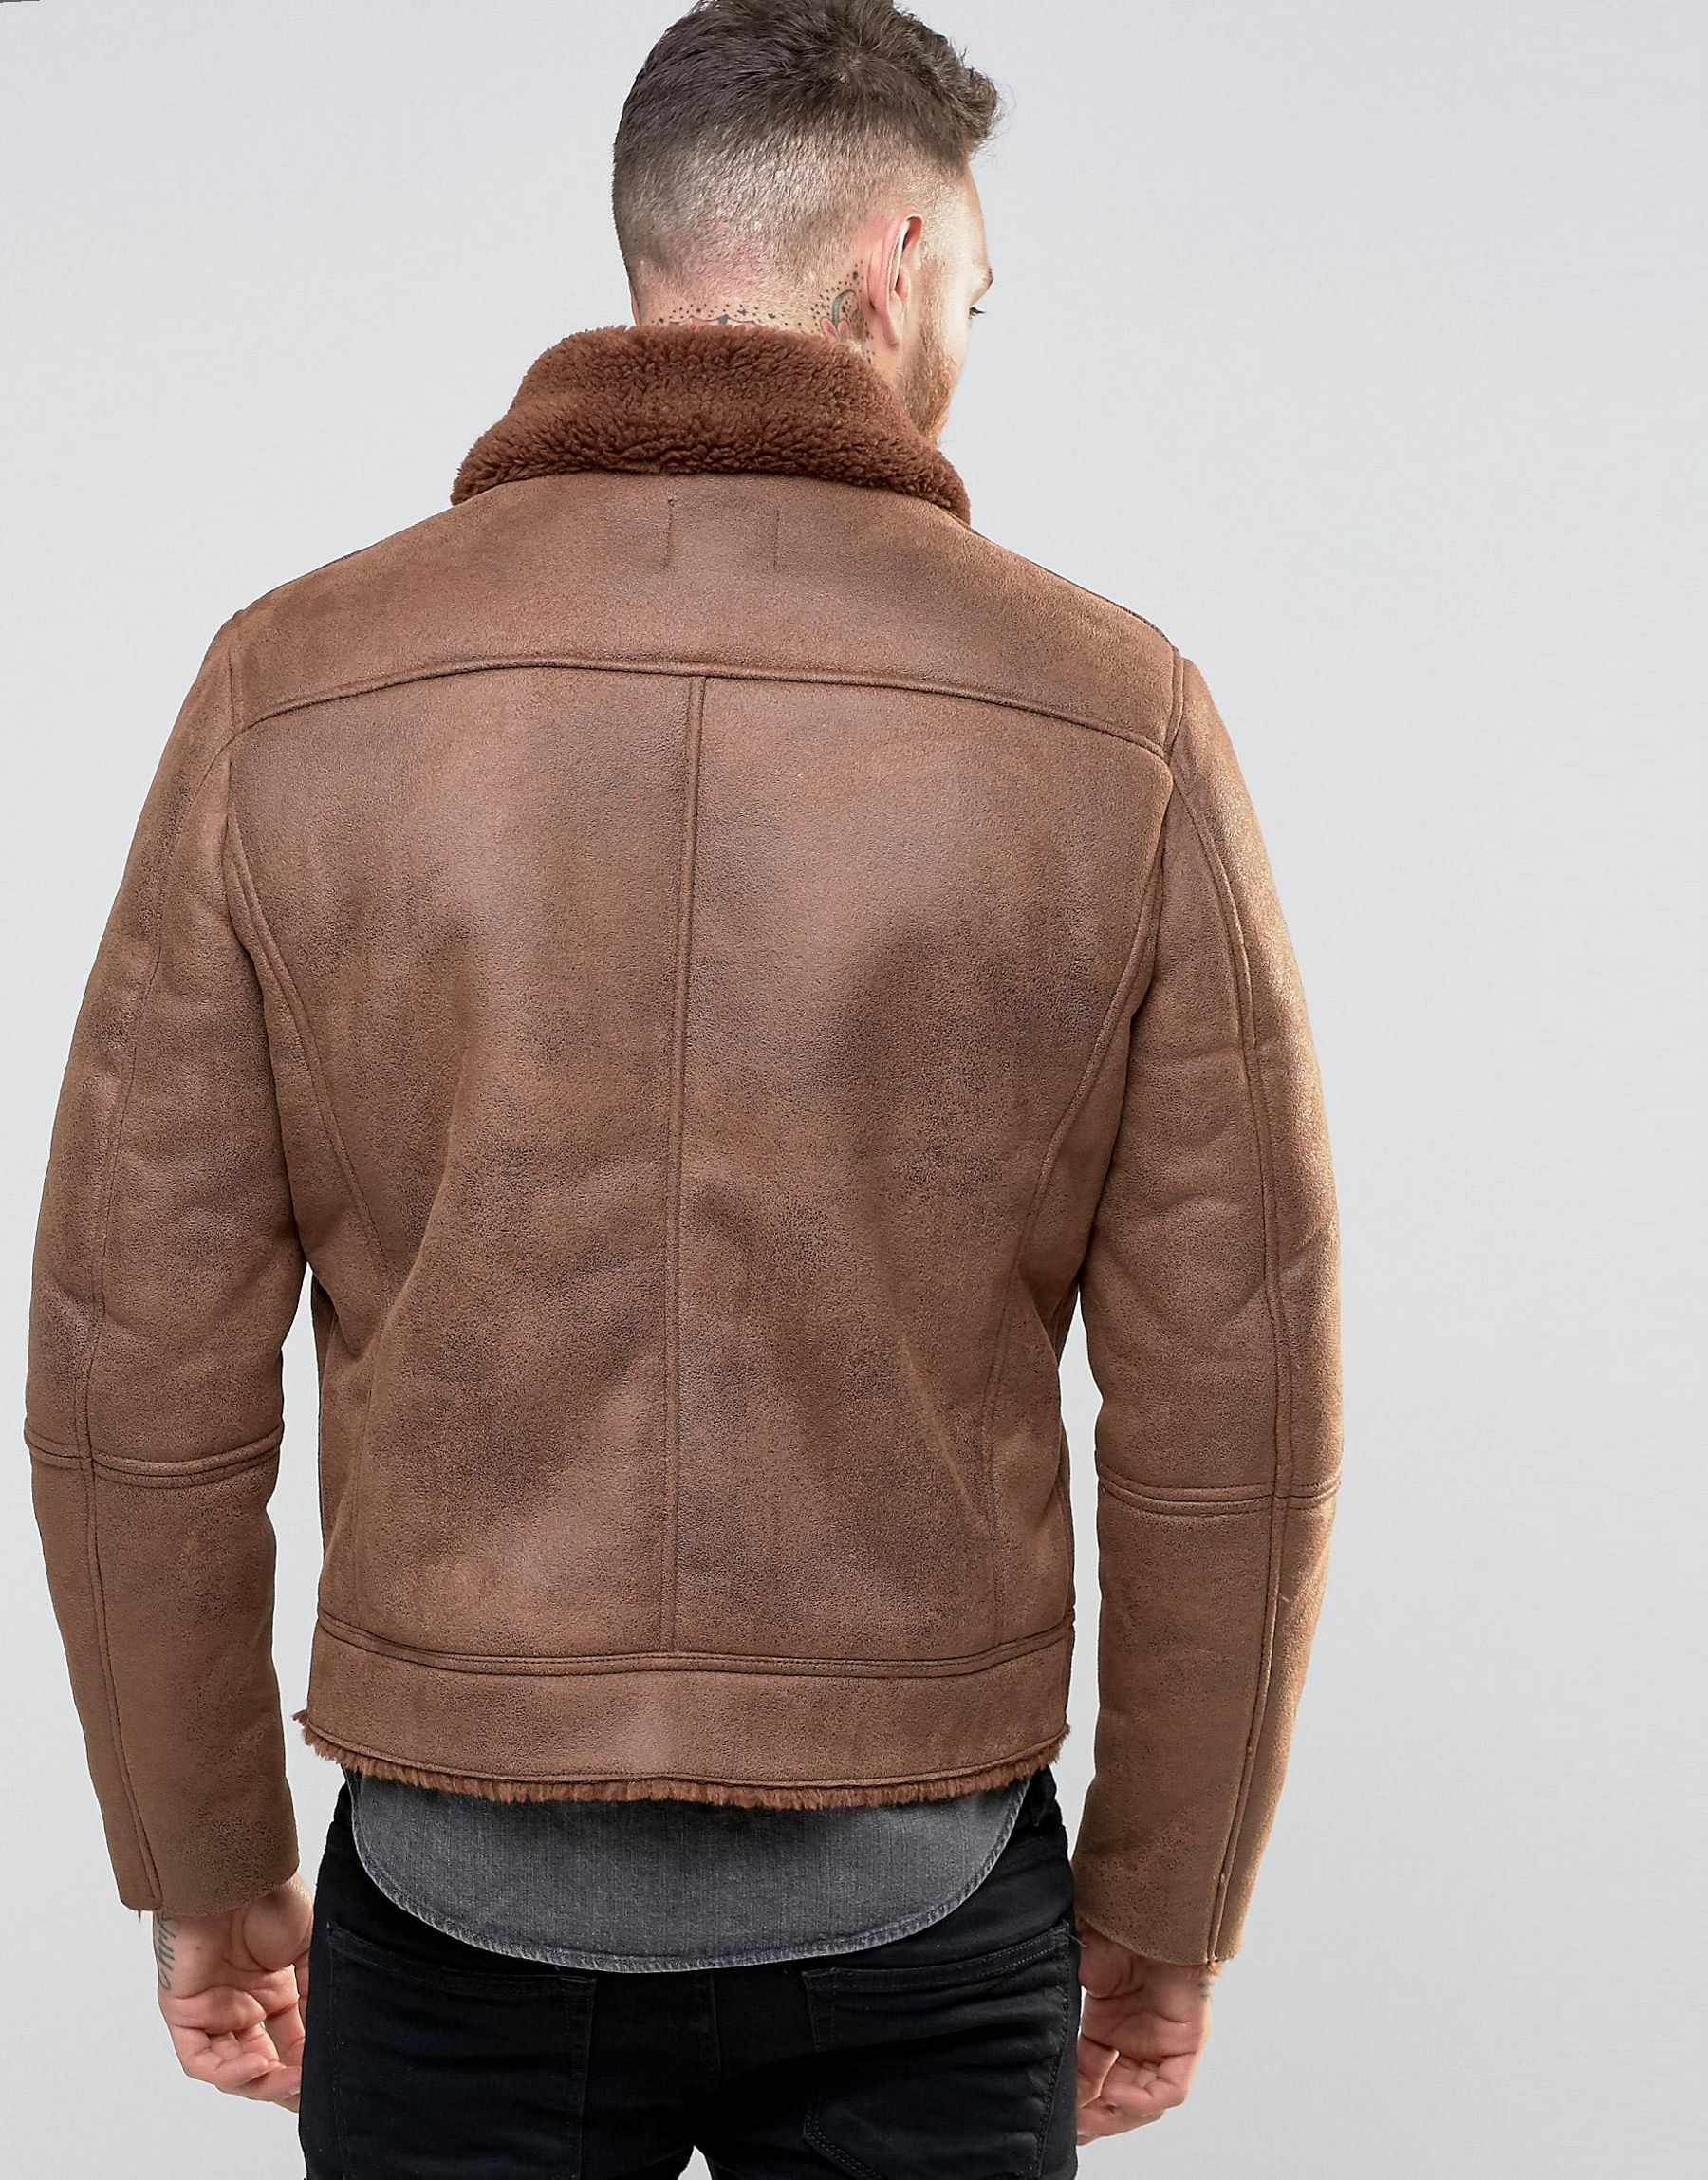 ASOS Leather Faux Shearling Jacket In Brown for Men - Lyst